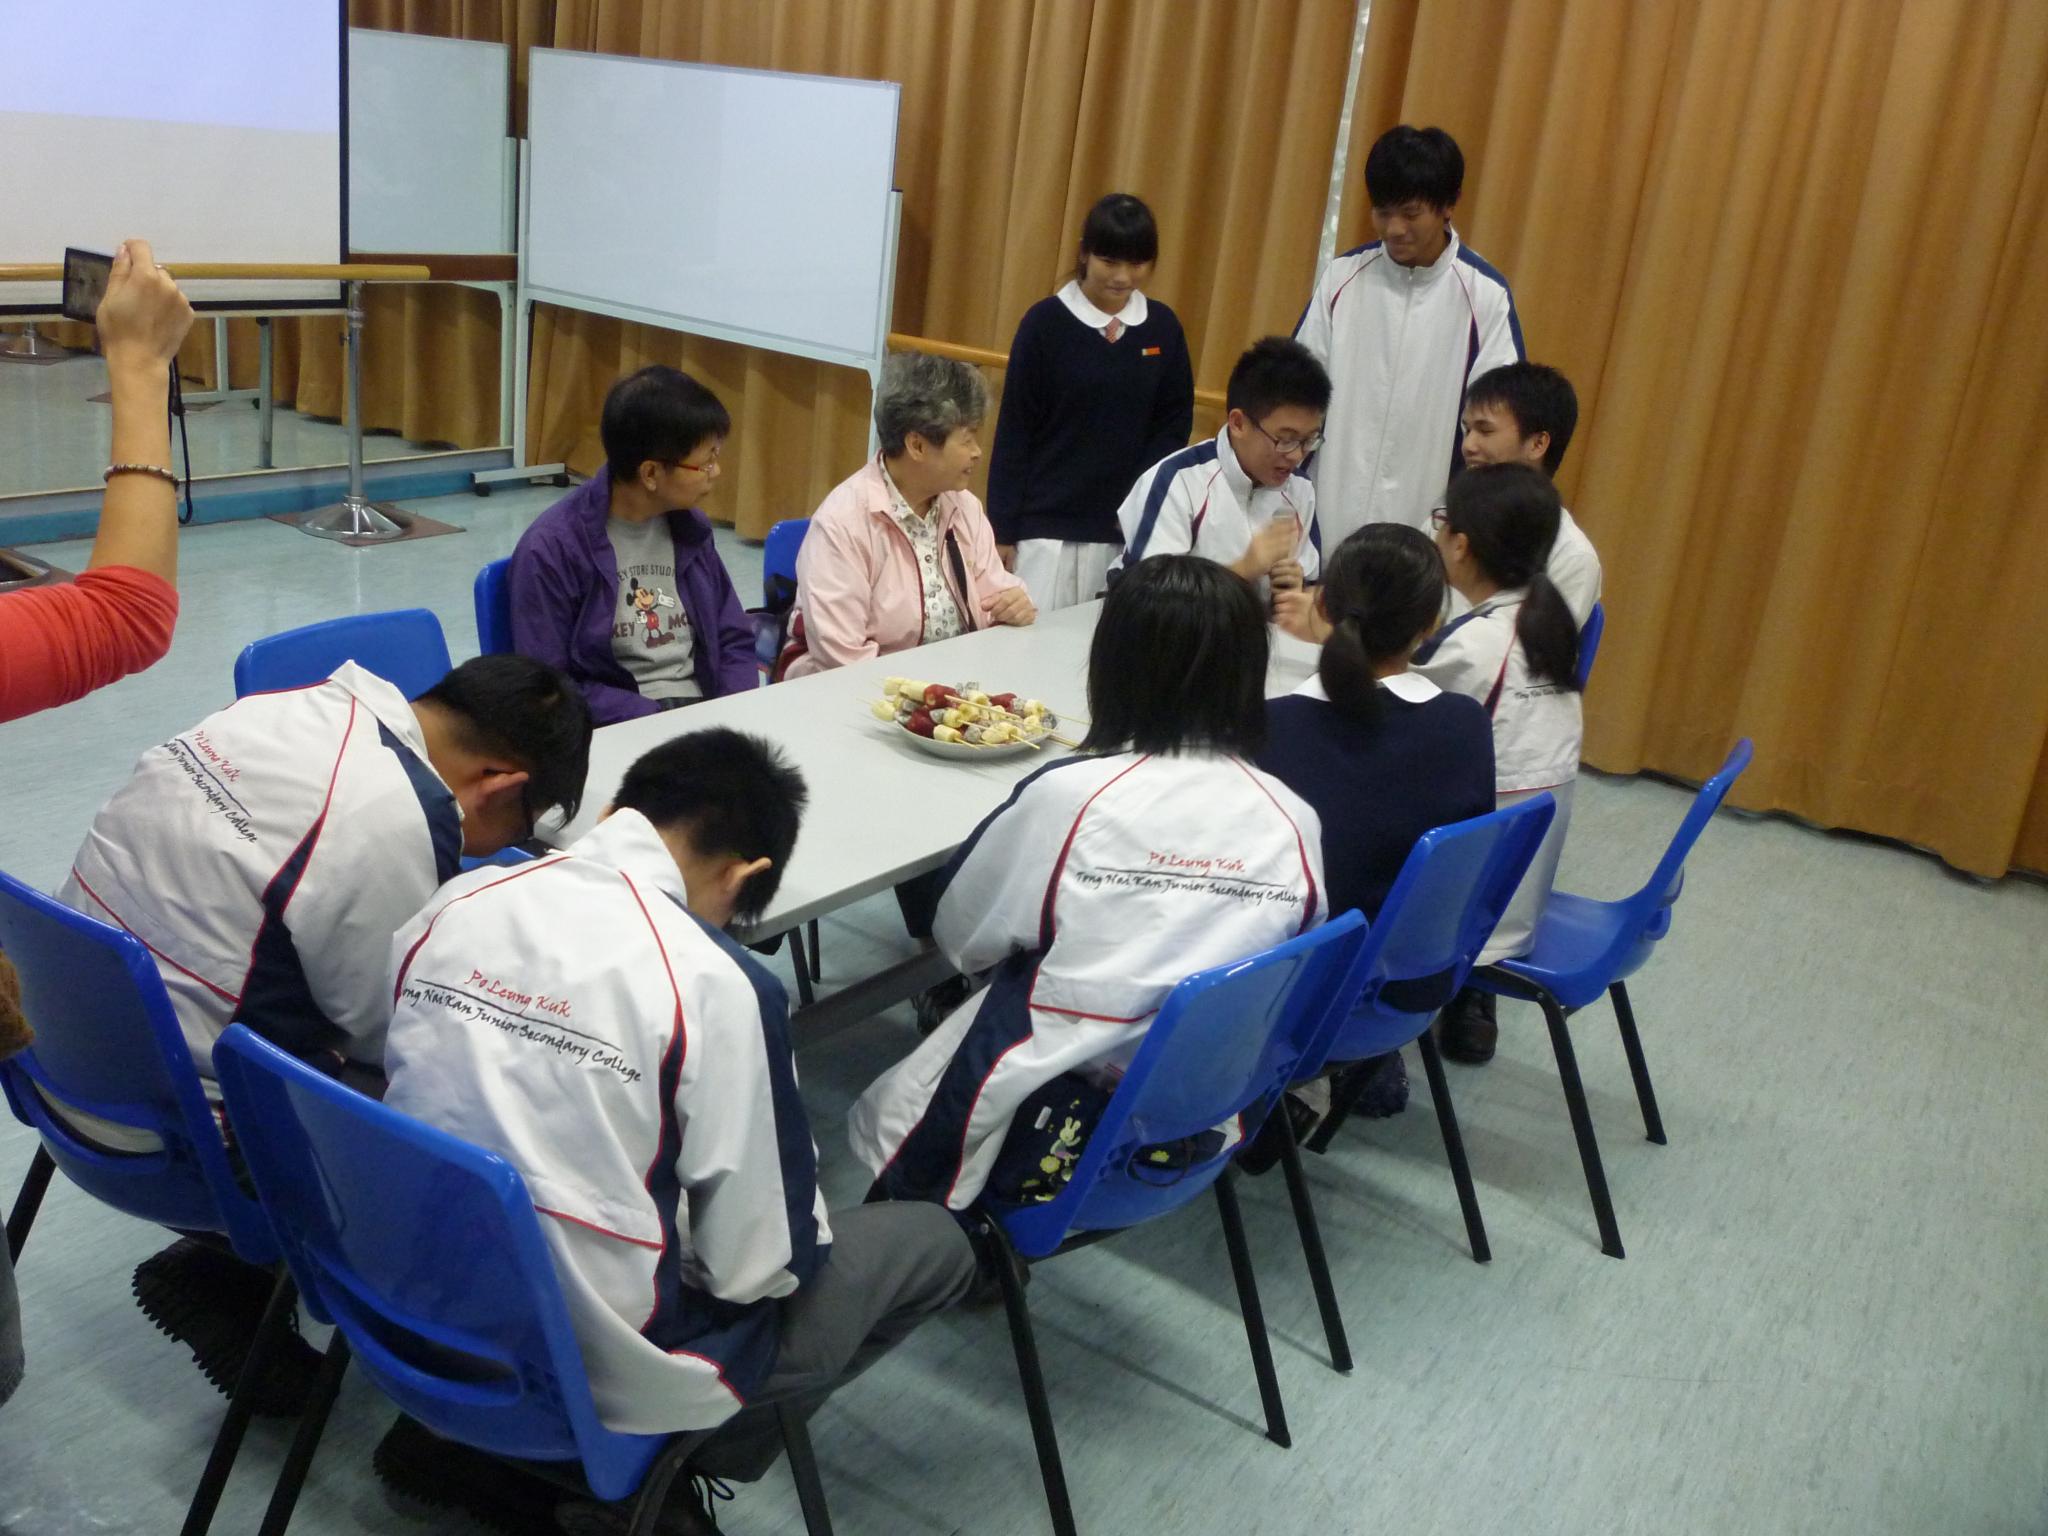 Each group of students prepared different kind of food for the sharing activity.